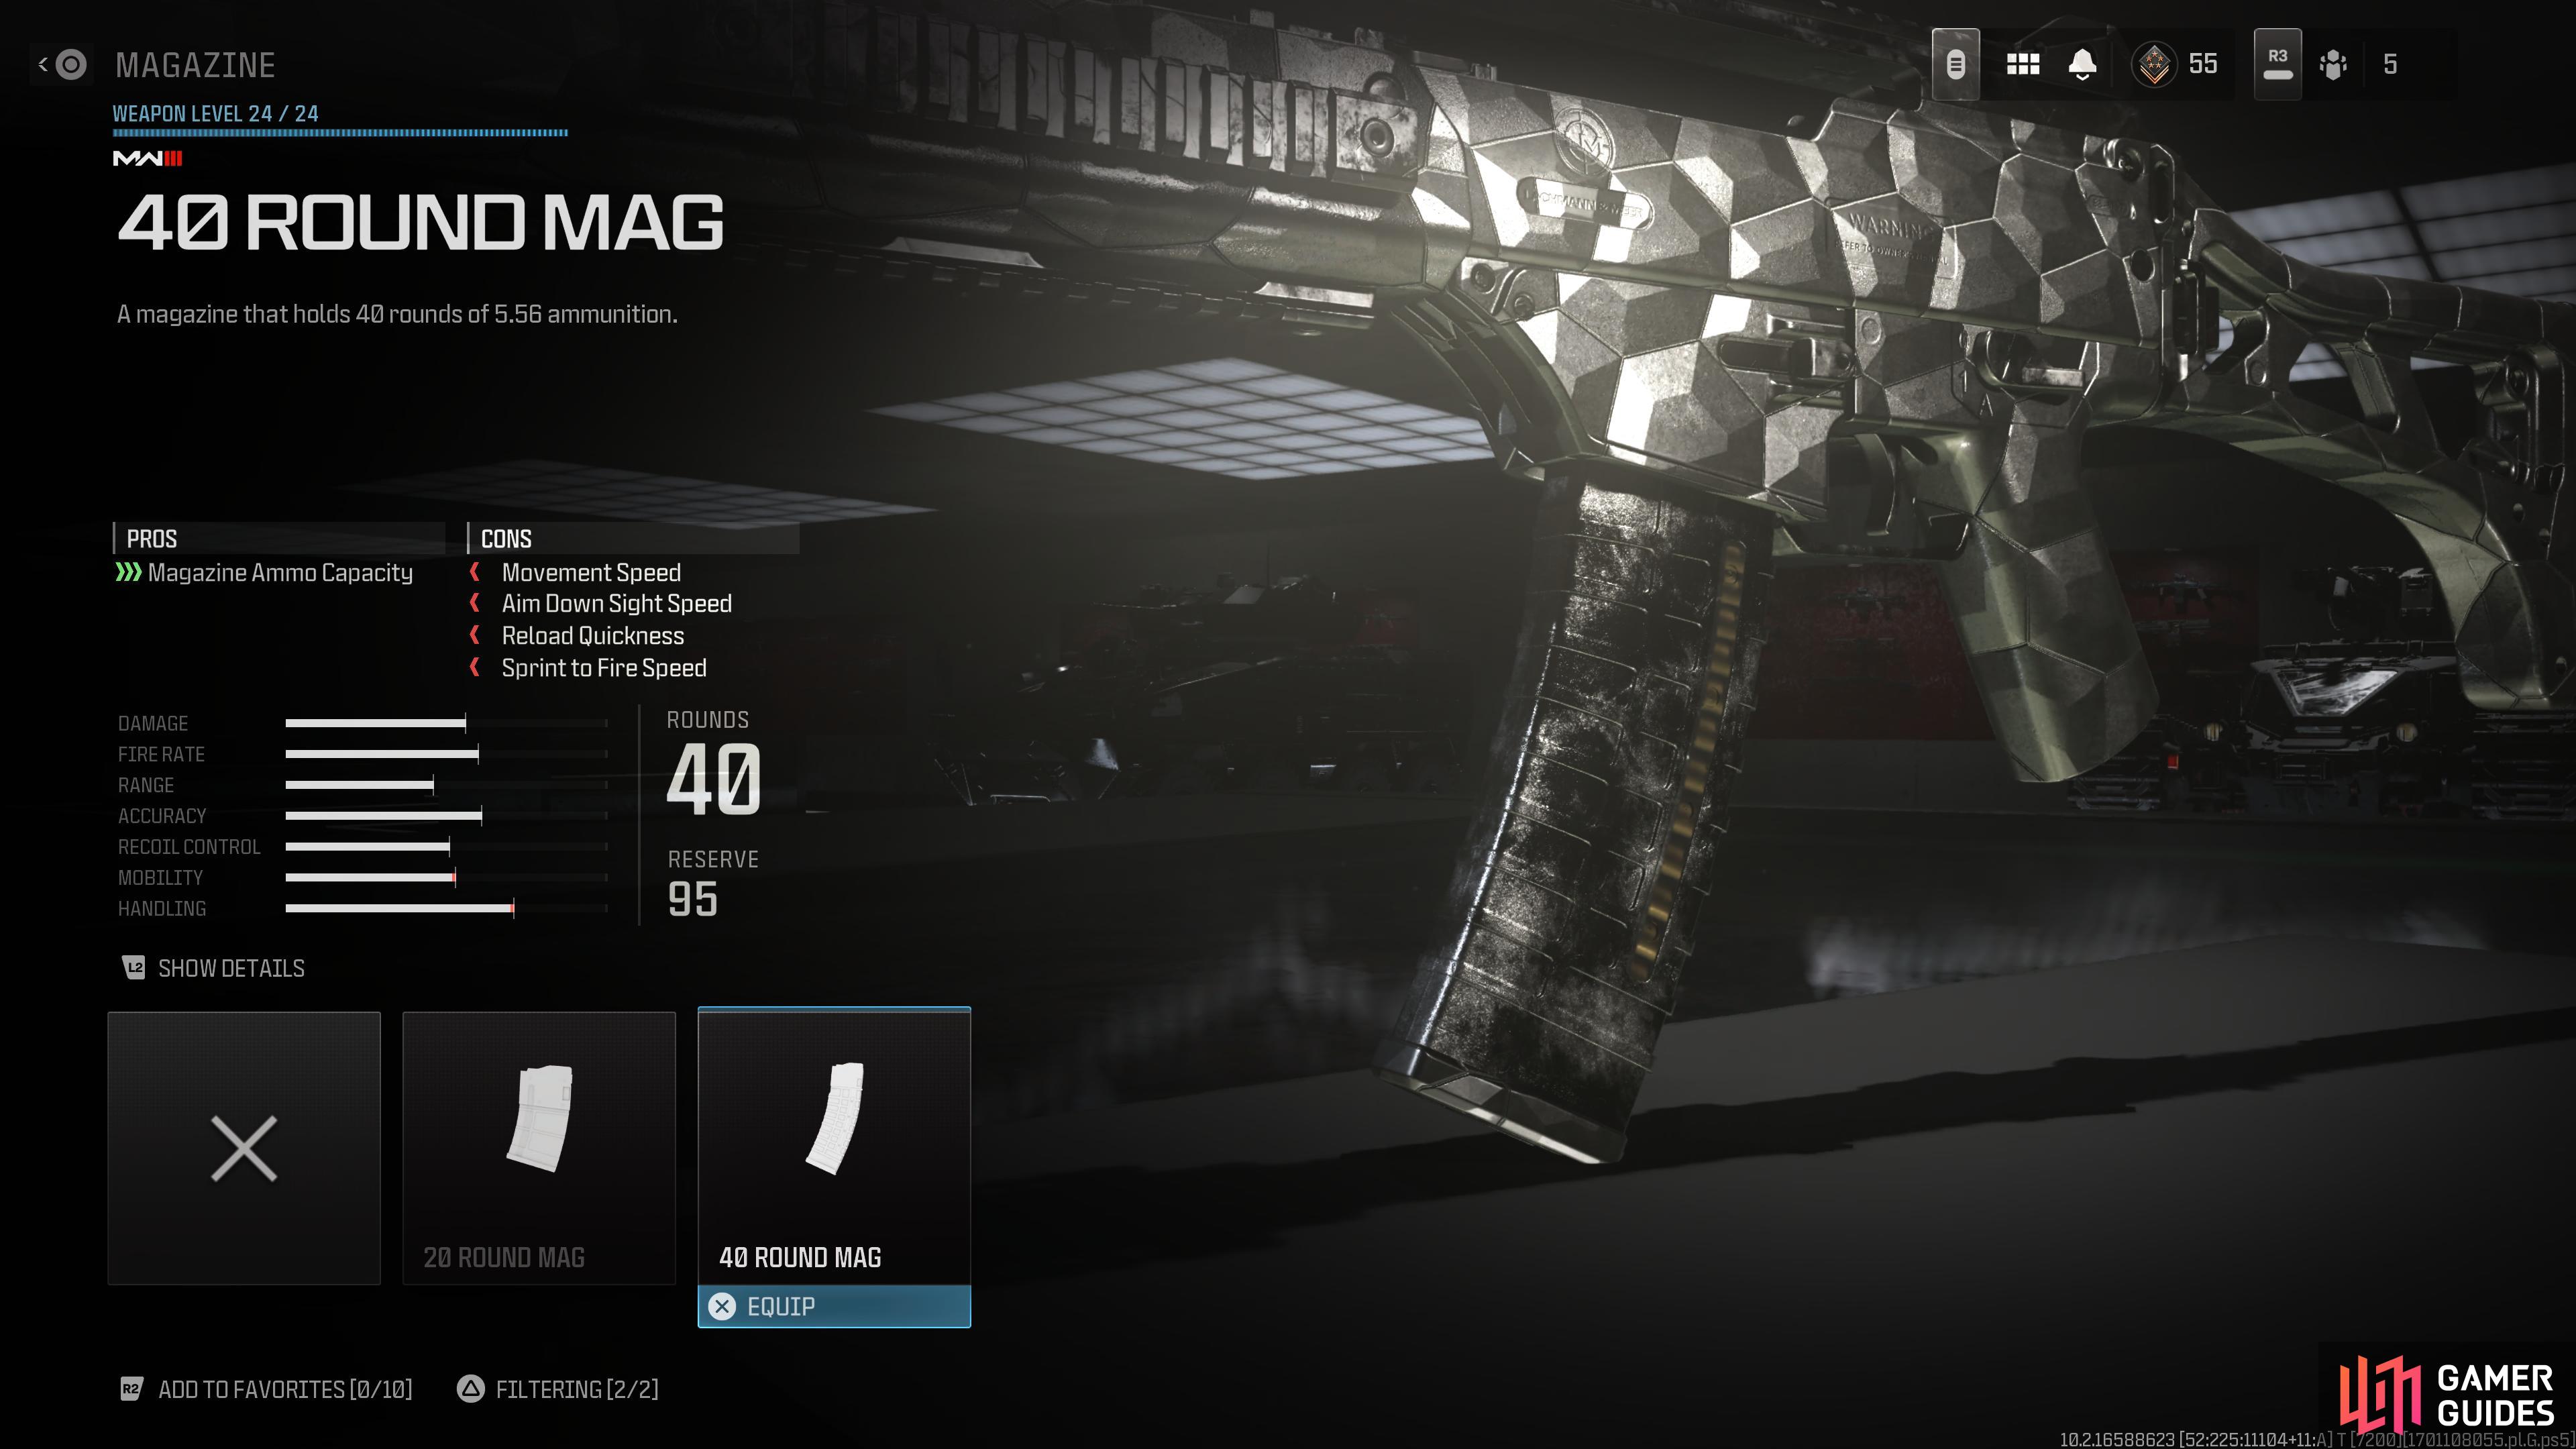 Equip the 40 round mag to help with the scoring three kills in one magazine